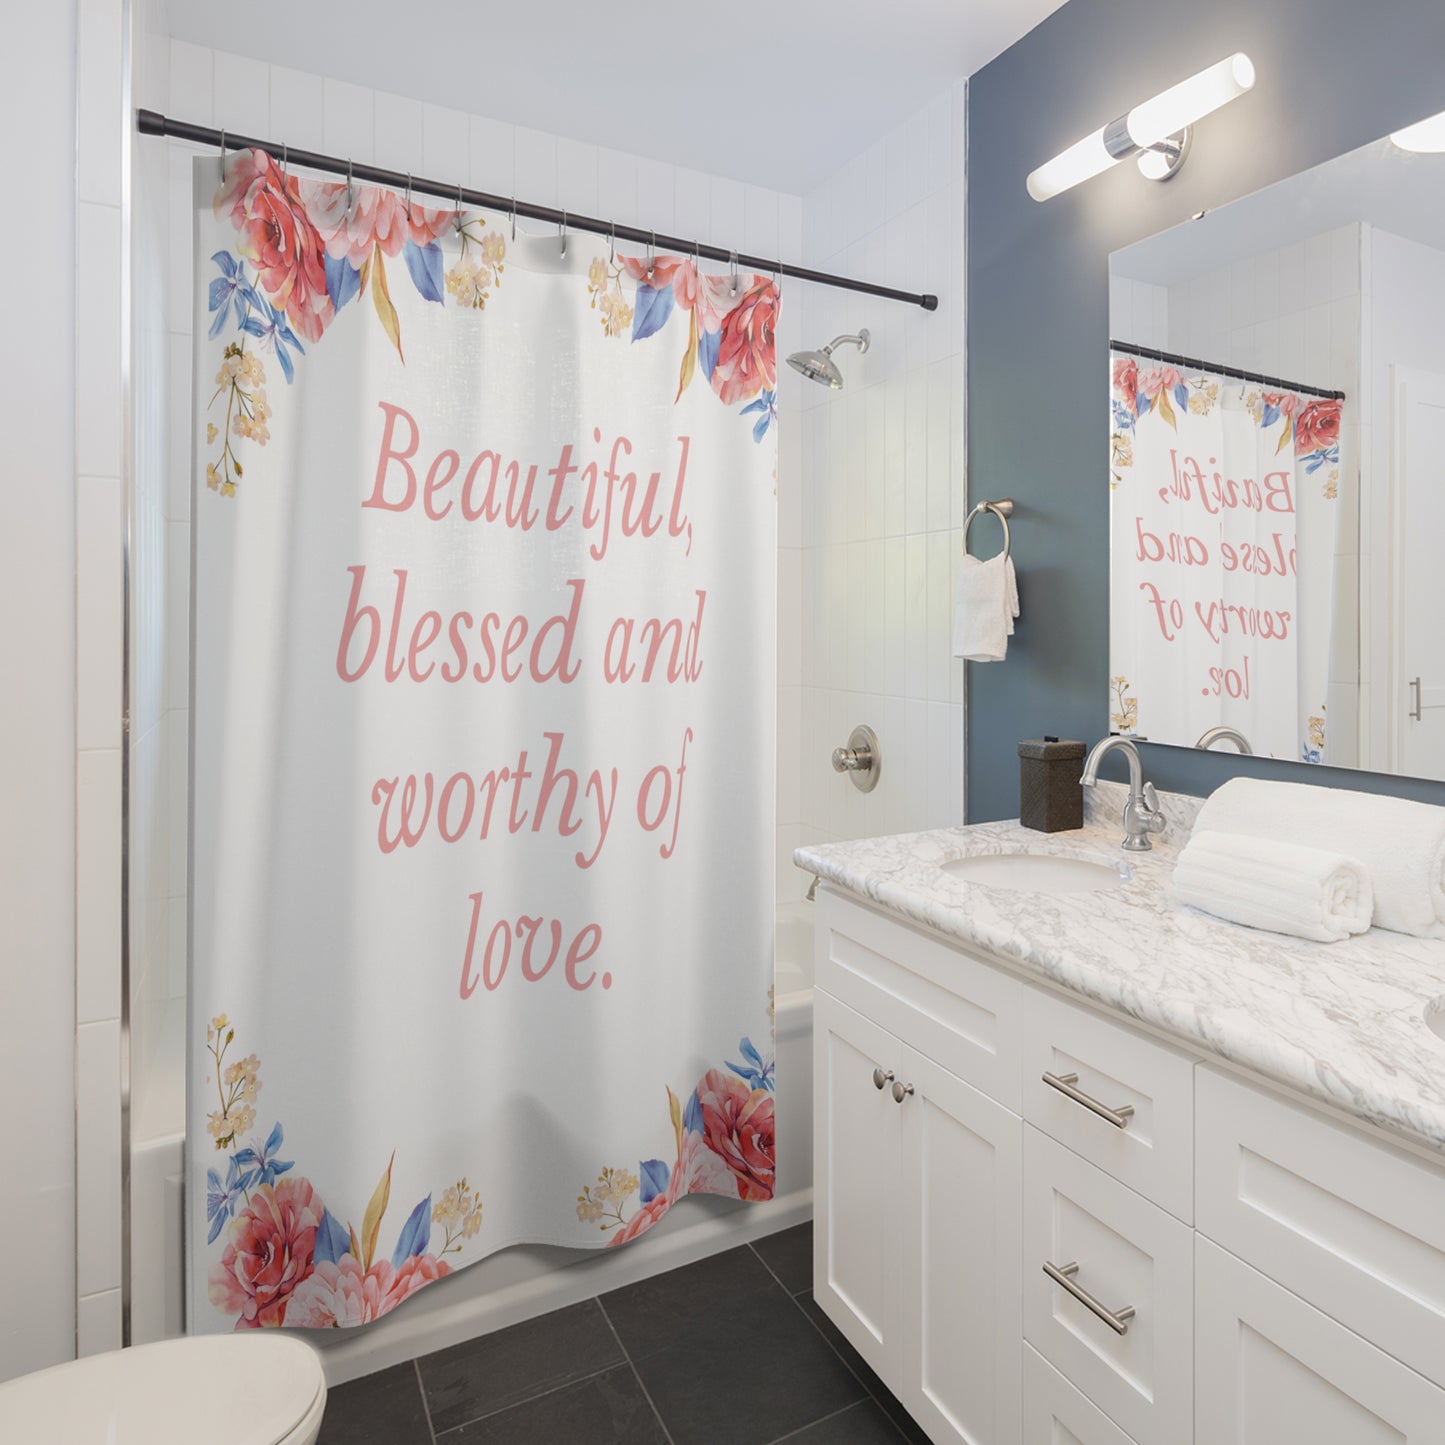 Beautiful, Blessed And Worthy of Love Shower Curtain